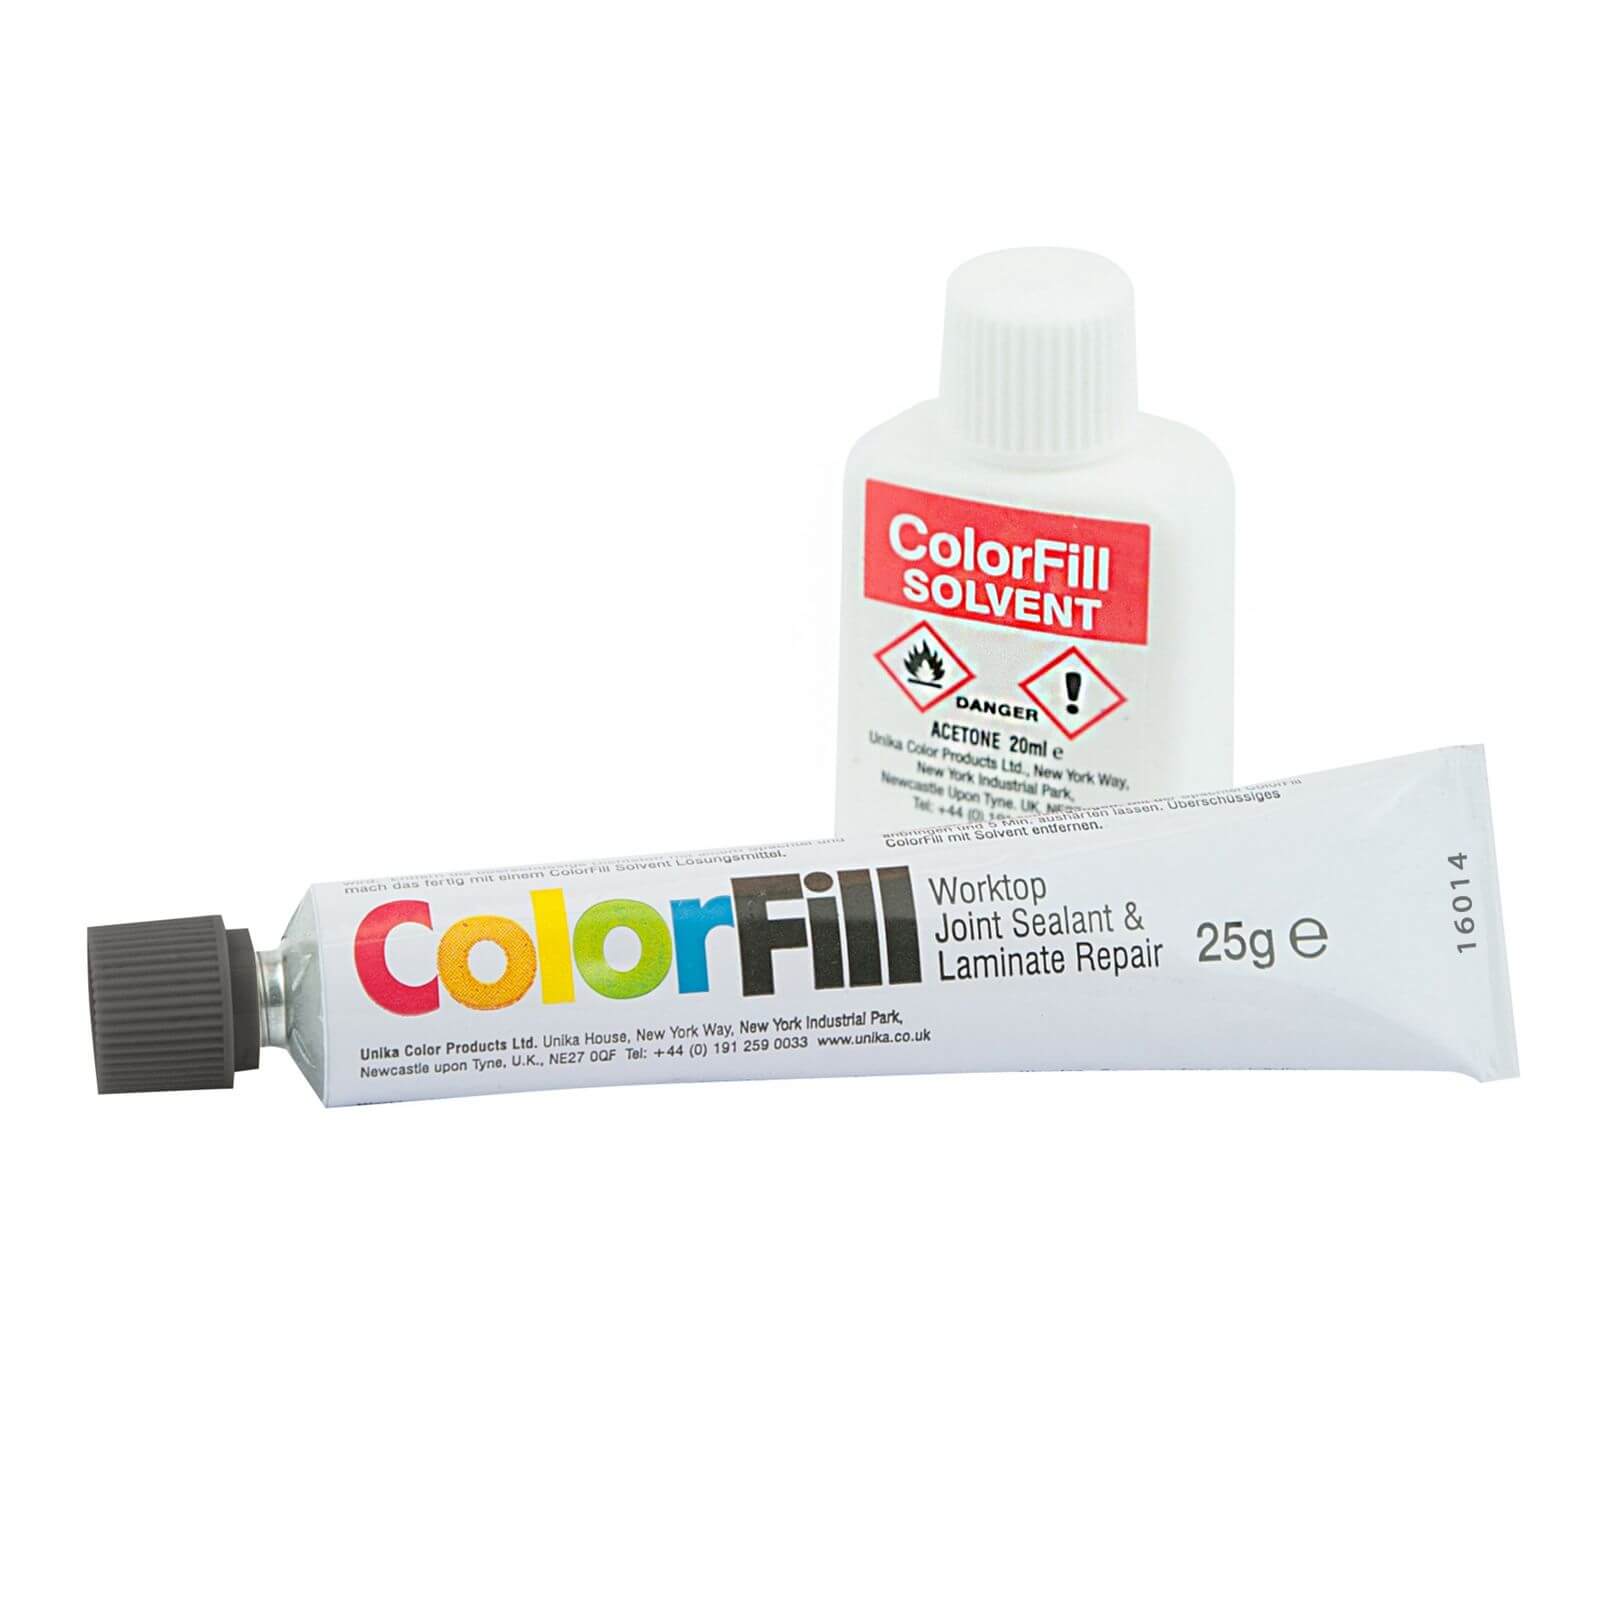 Unika Colorfill And Solvent Mouse Dust - 25g